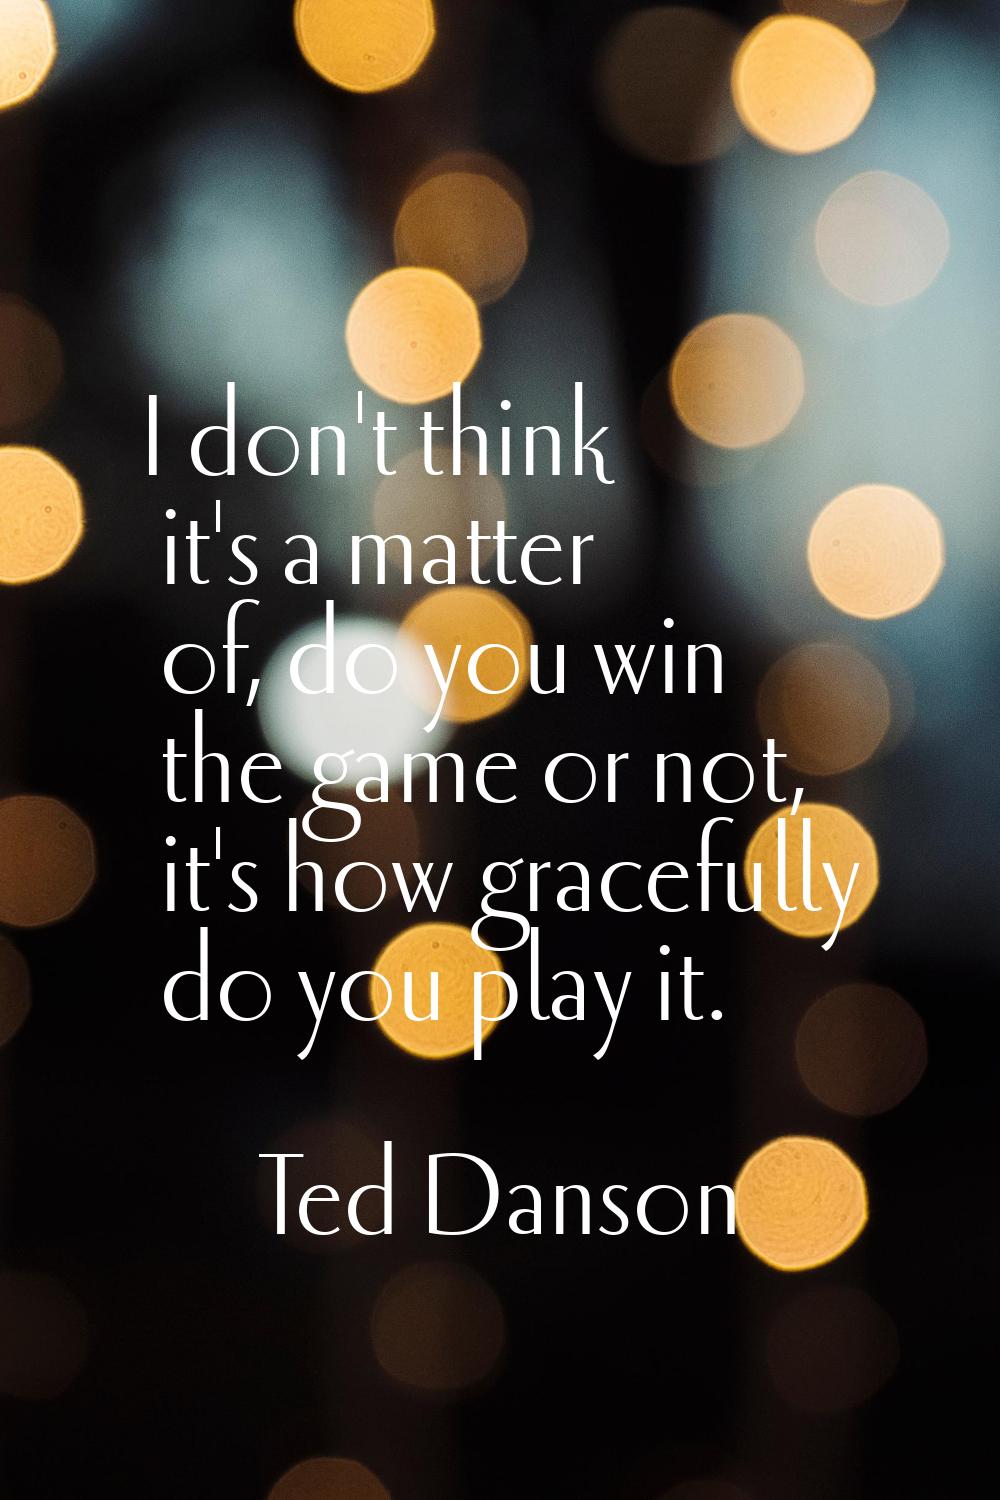 I don't think it's a matter of, do you win the game or not, it's how gracefully do you play it.